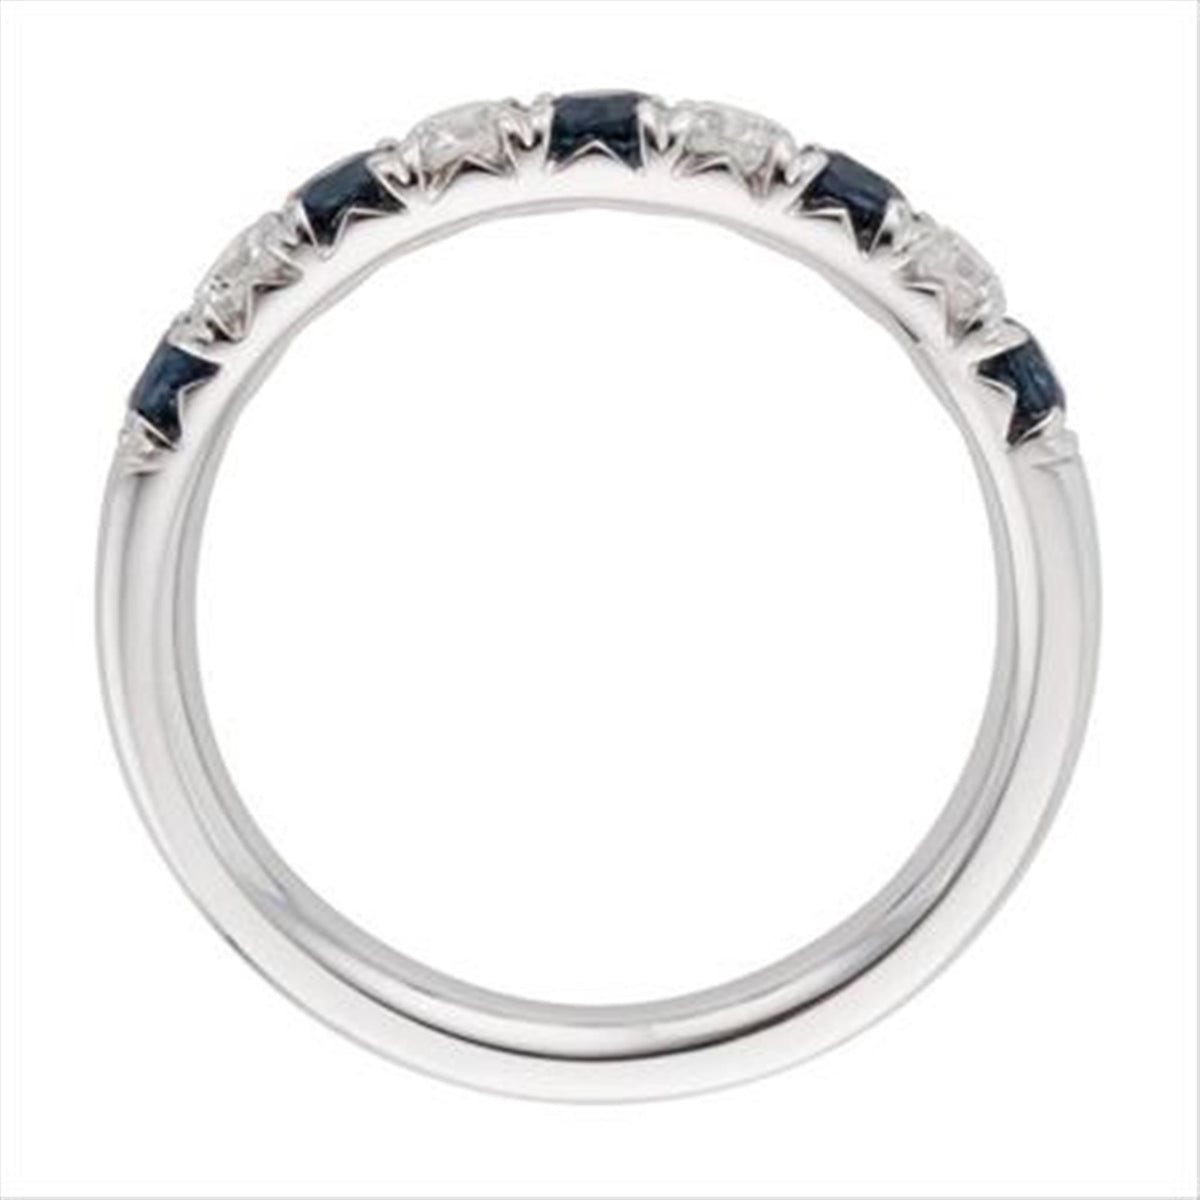 18Kt White Gold Chevron Band with Sapphires and Diamonds